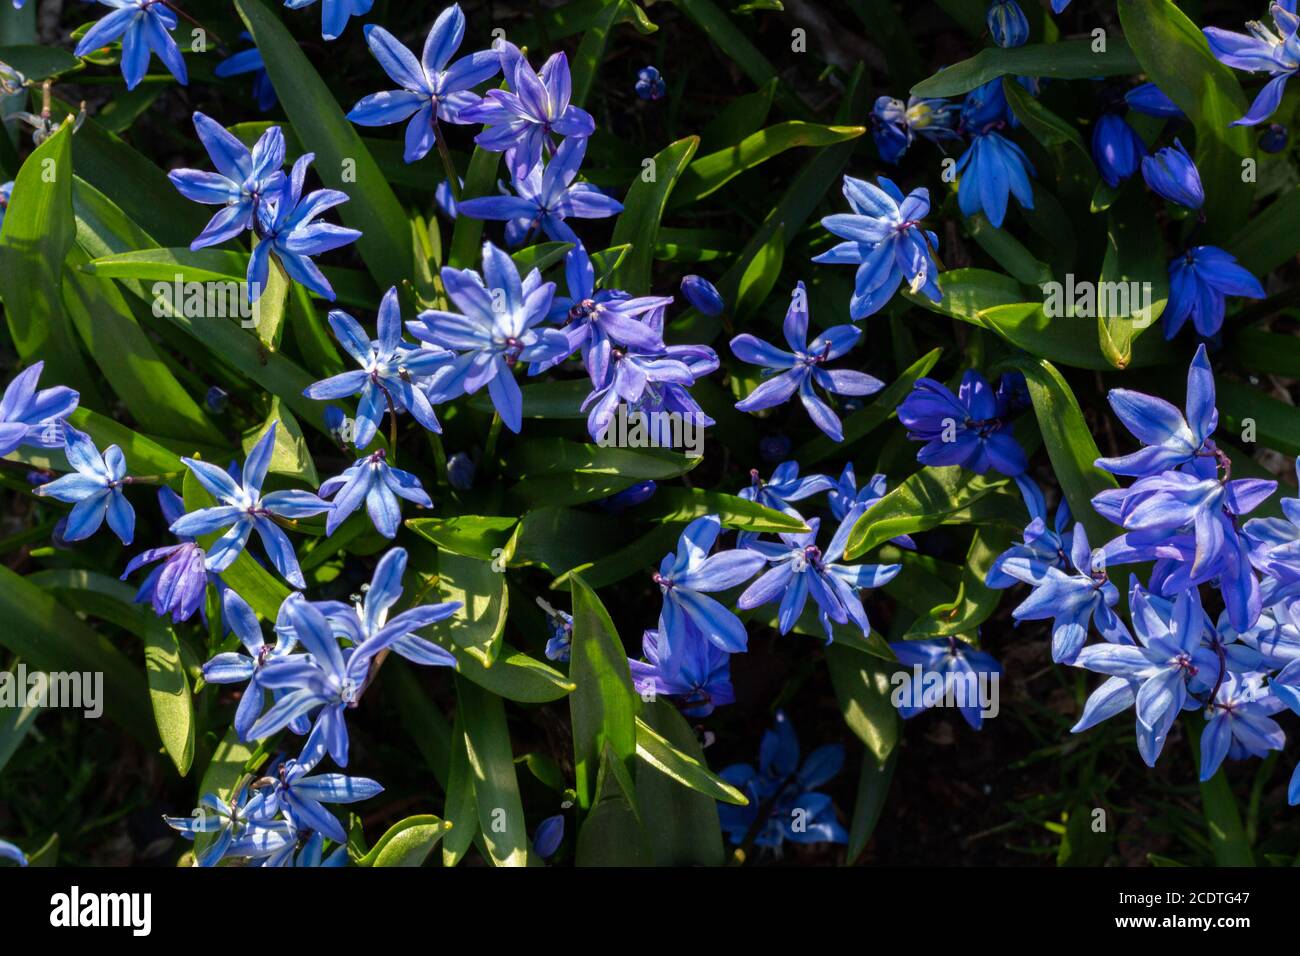 a group of blue purple scilla siberica flowers among green grasses taken from above Stock Photo